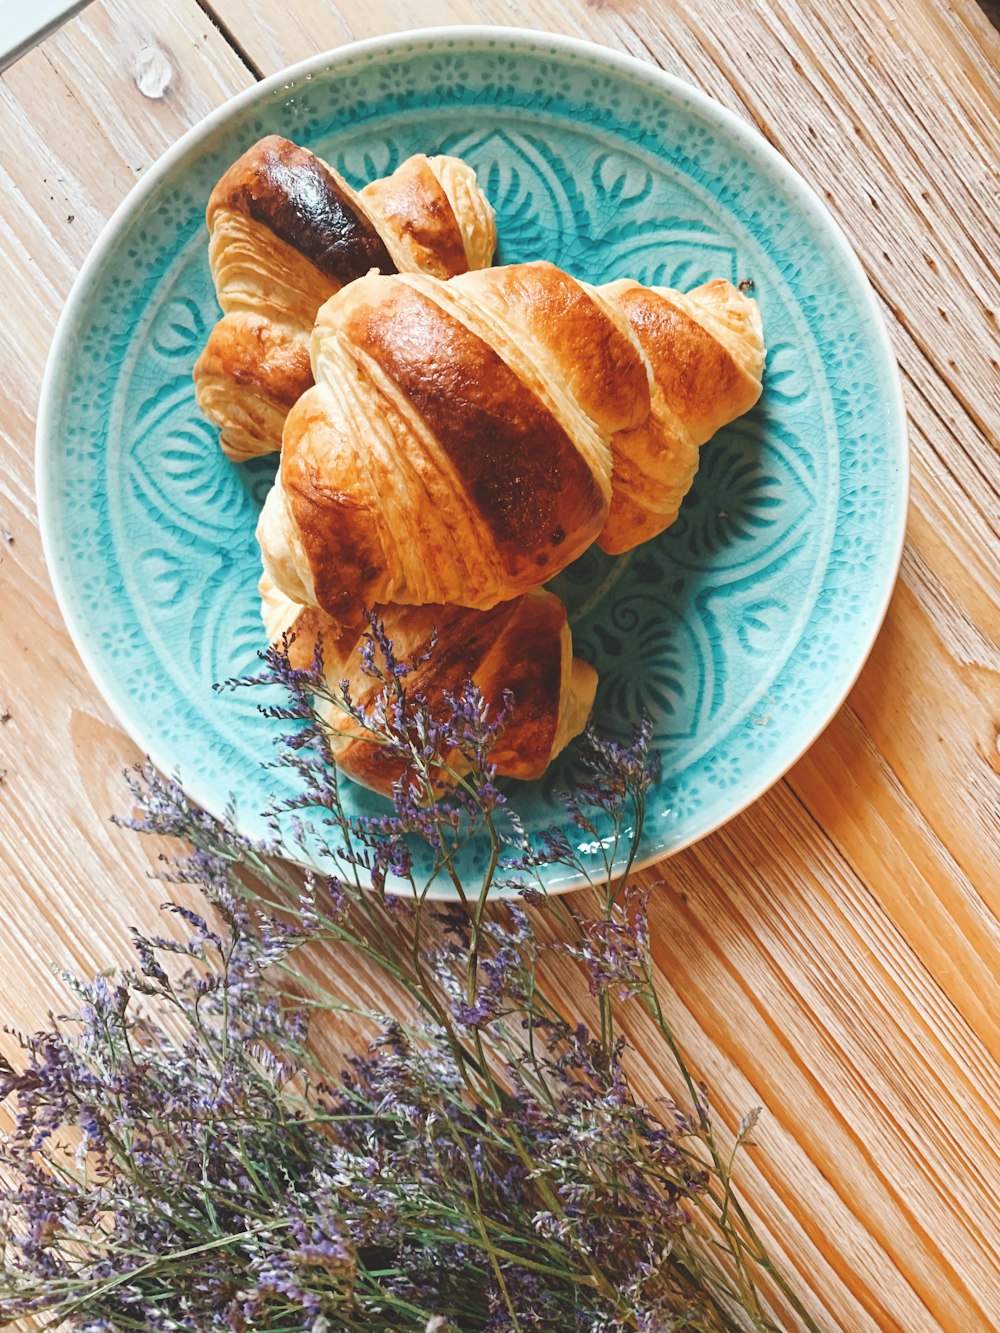 a plate of croissants and lavender on a wooden table